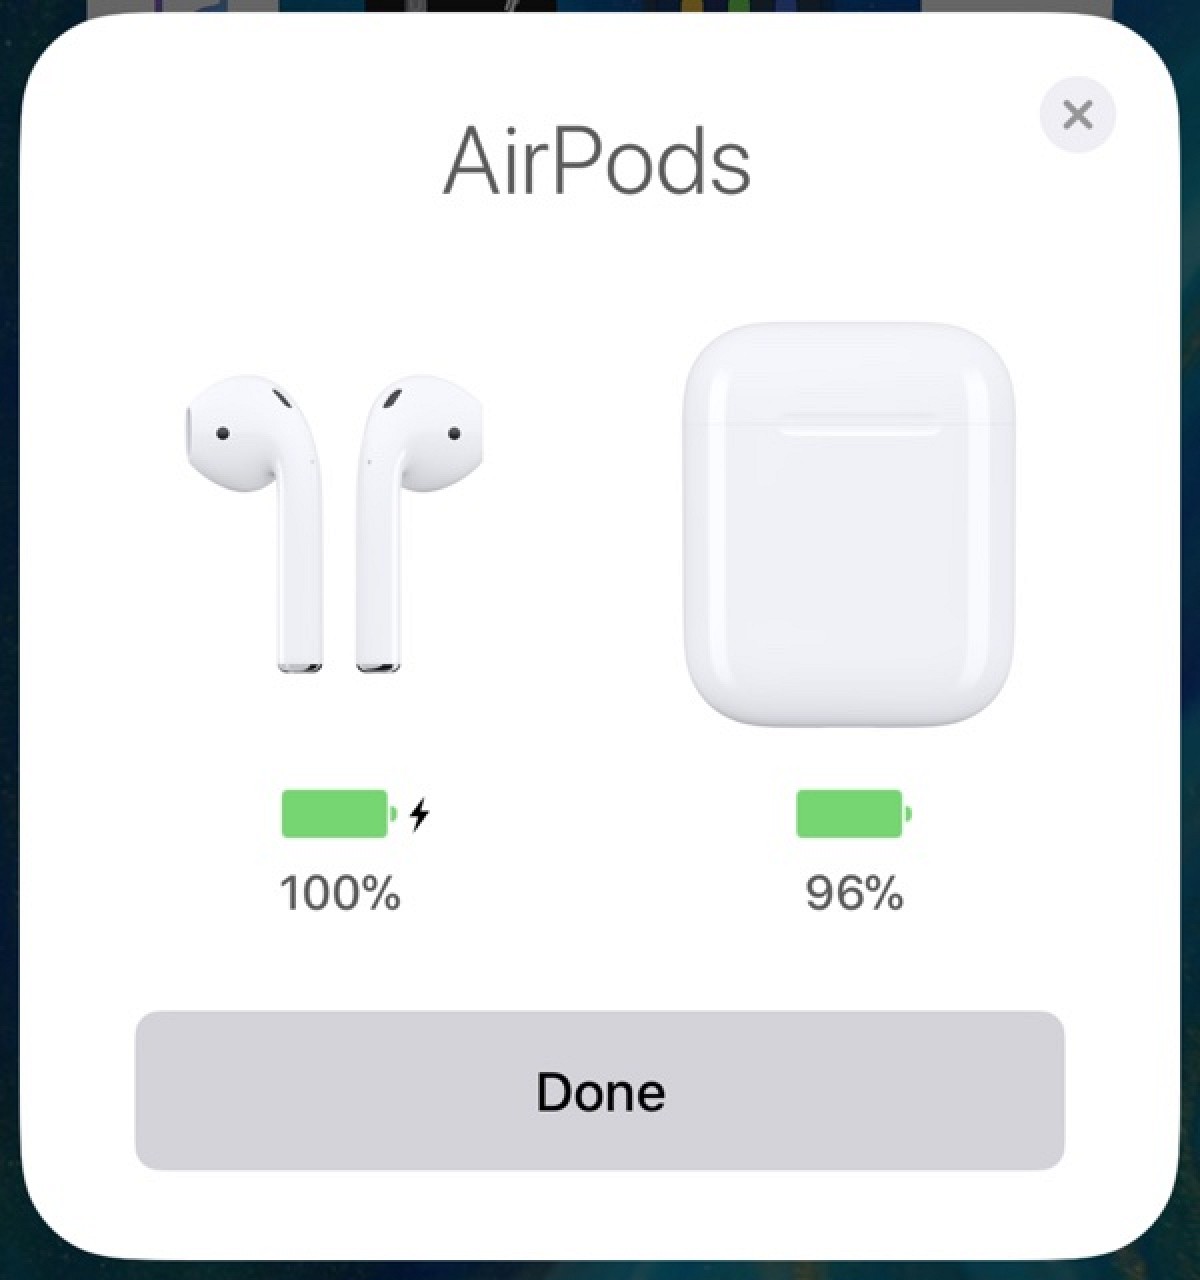 Instructions to connect Airpods to Iphone